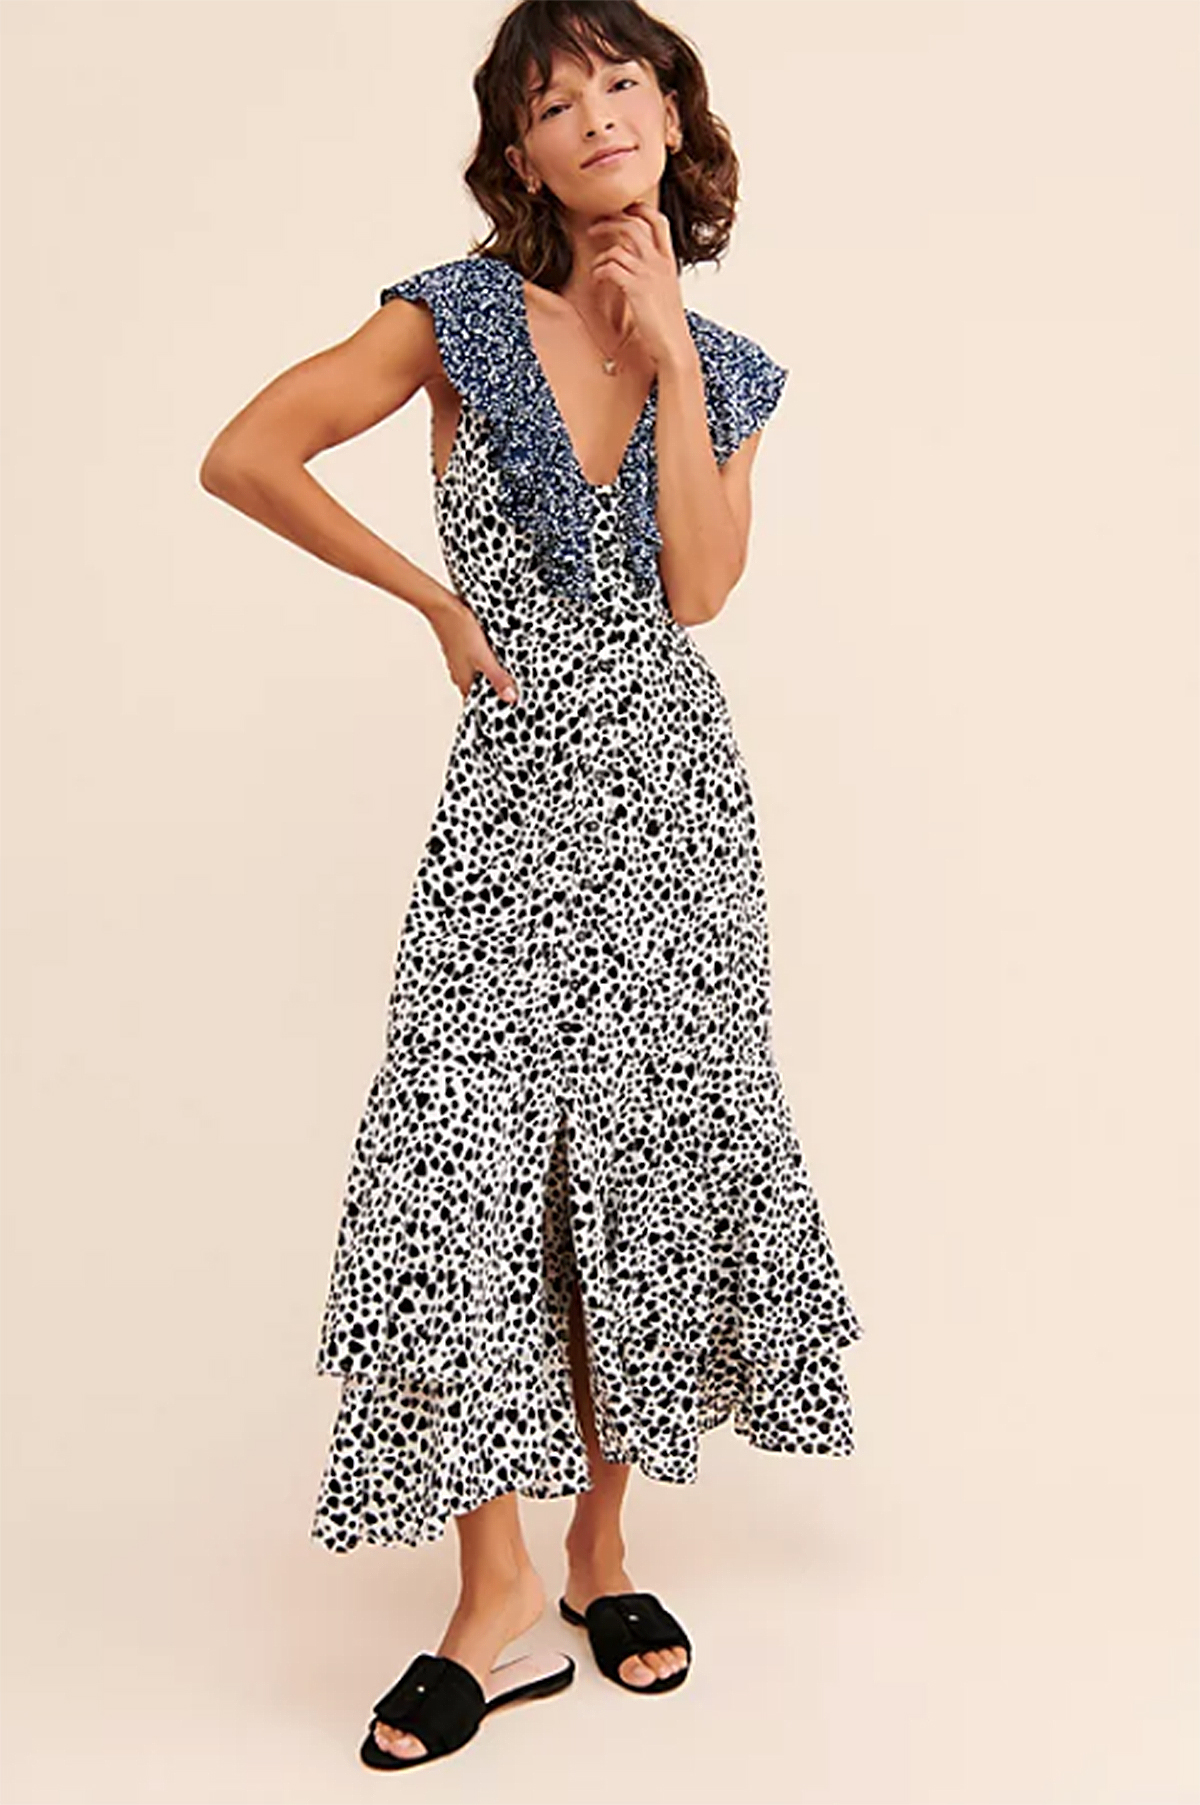 Free People: 7 Boho-Chic Dresses on Sale Right Now